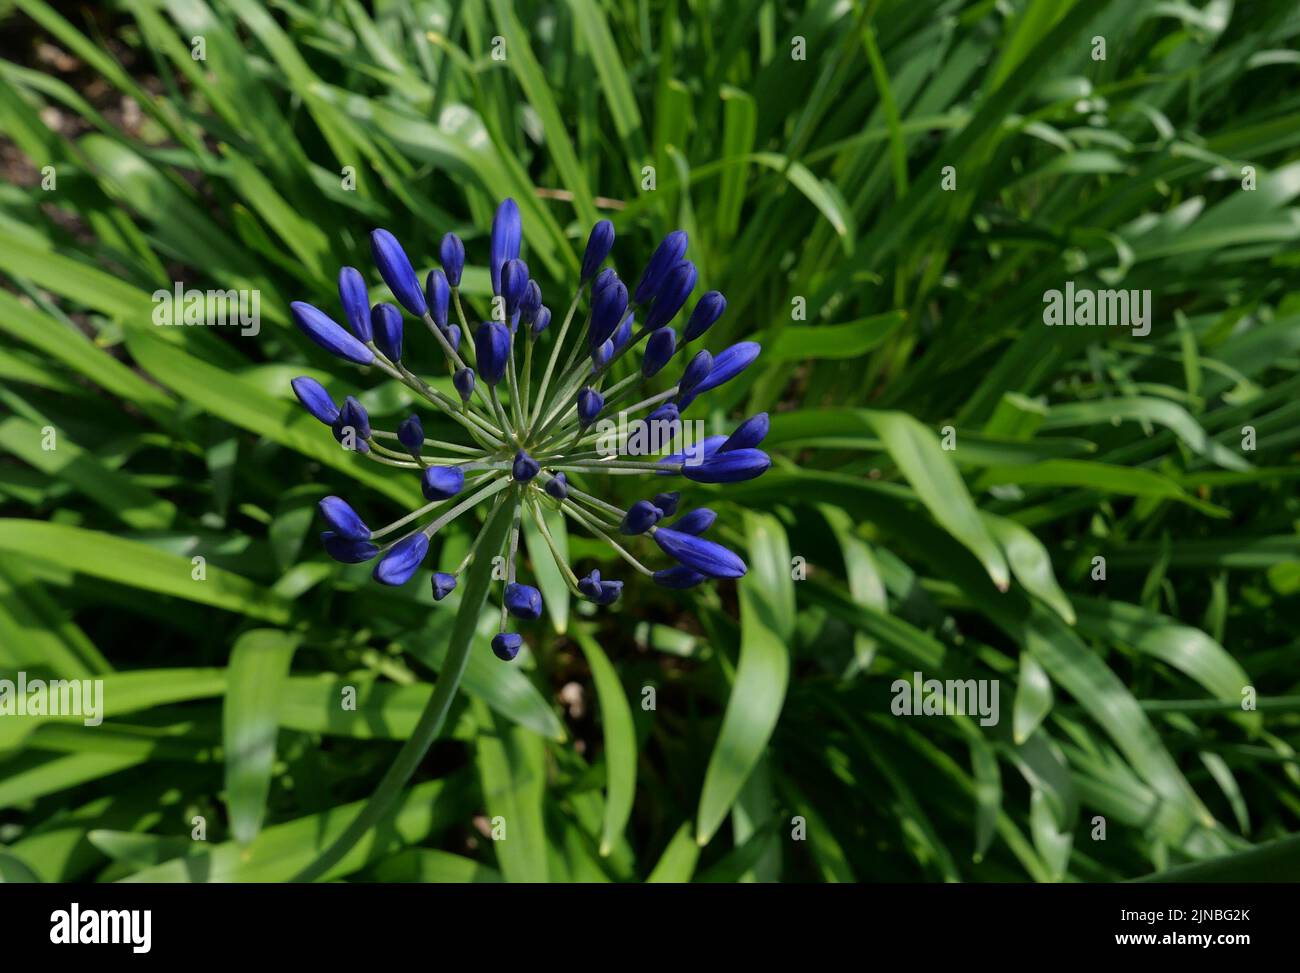 Full frame background of bright blue agapanthus bloom and foliage Stock Photo